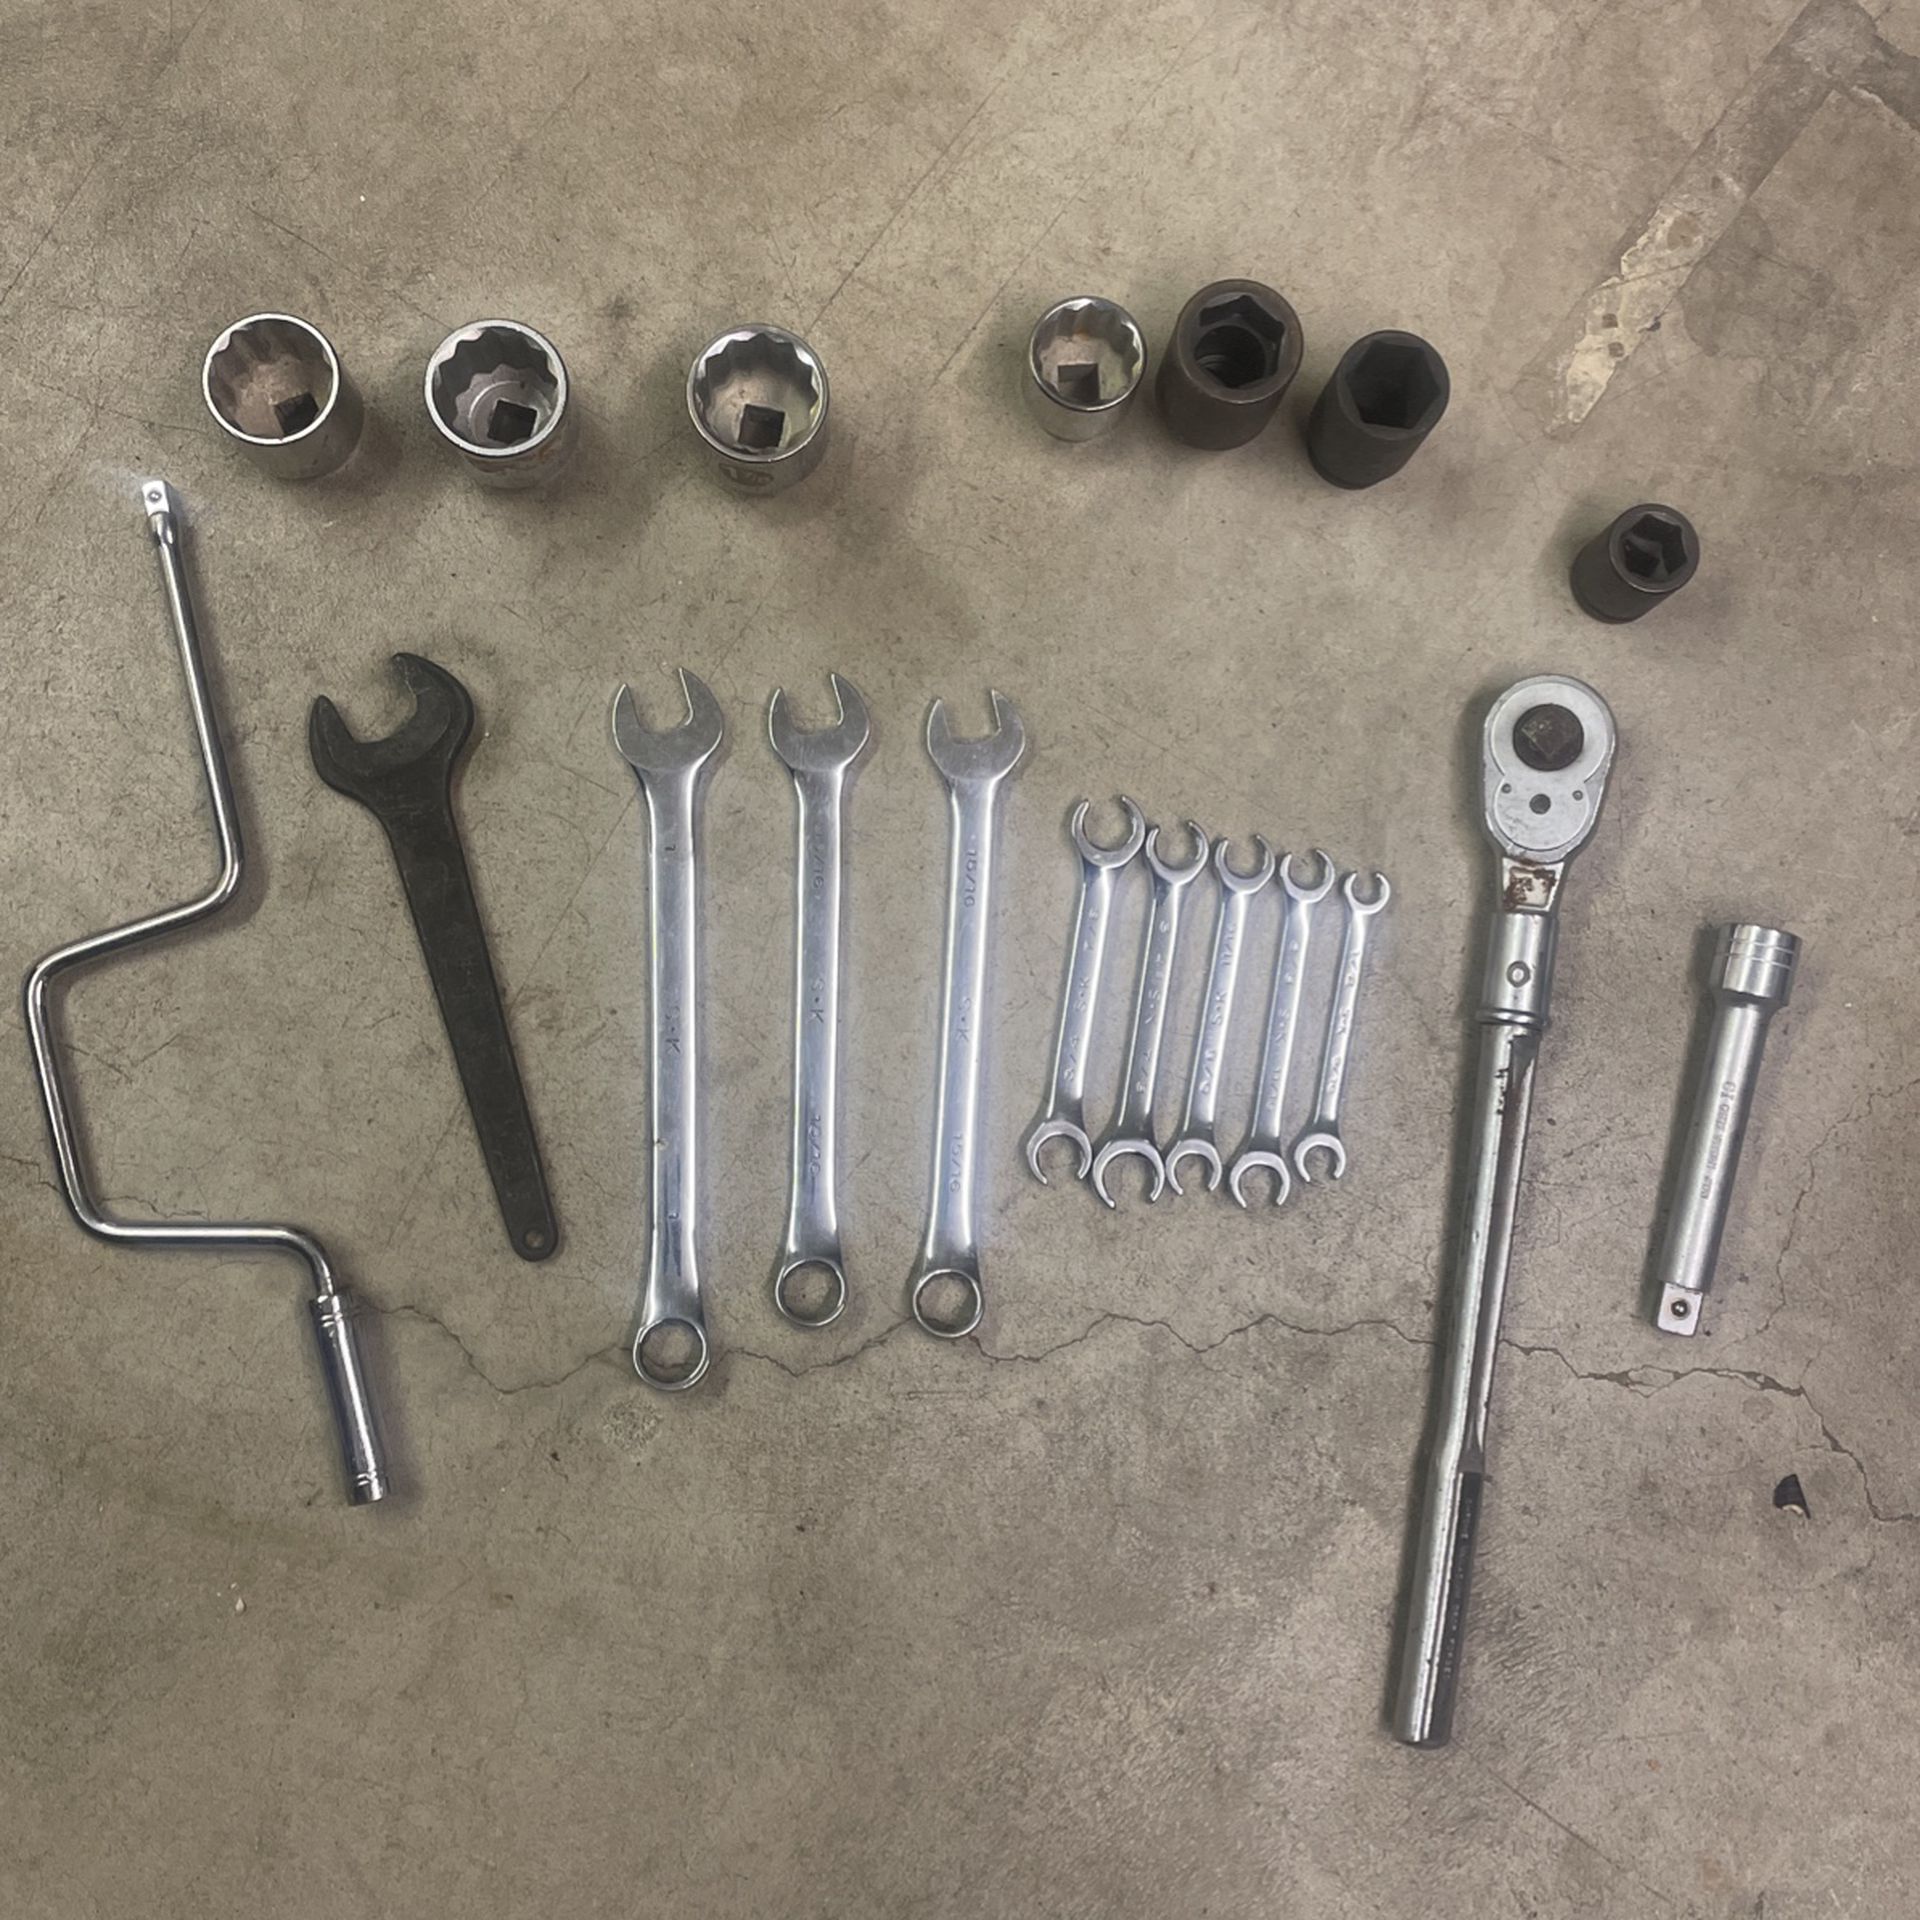 Large Armstrong, K-D, Proto Sockets, SK Wrenches, CI Tools 3/4 Ratchet